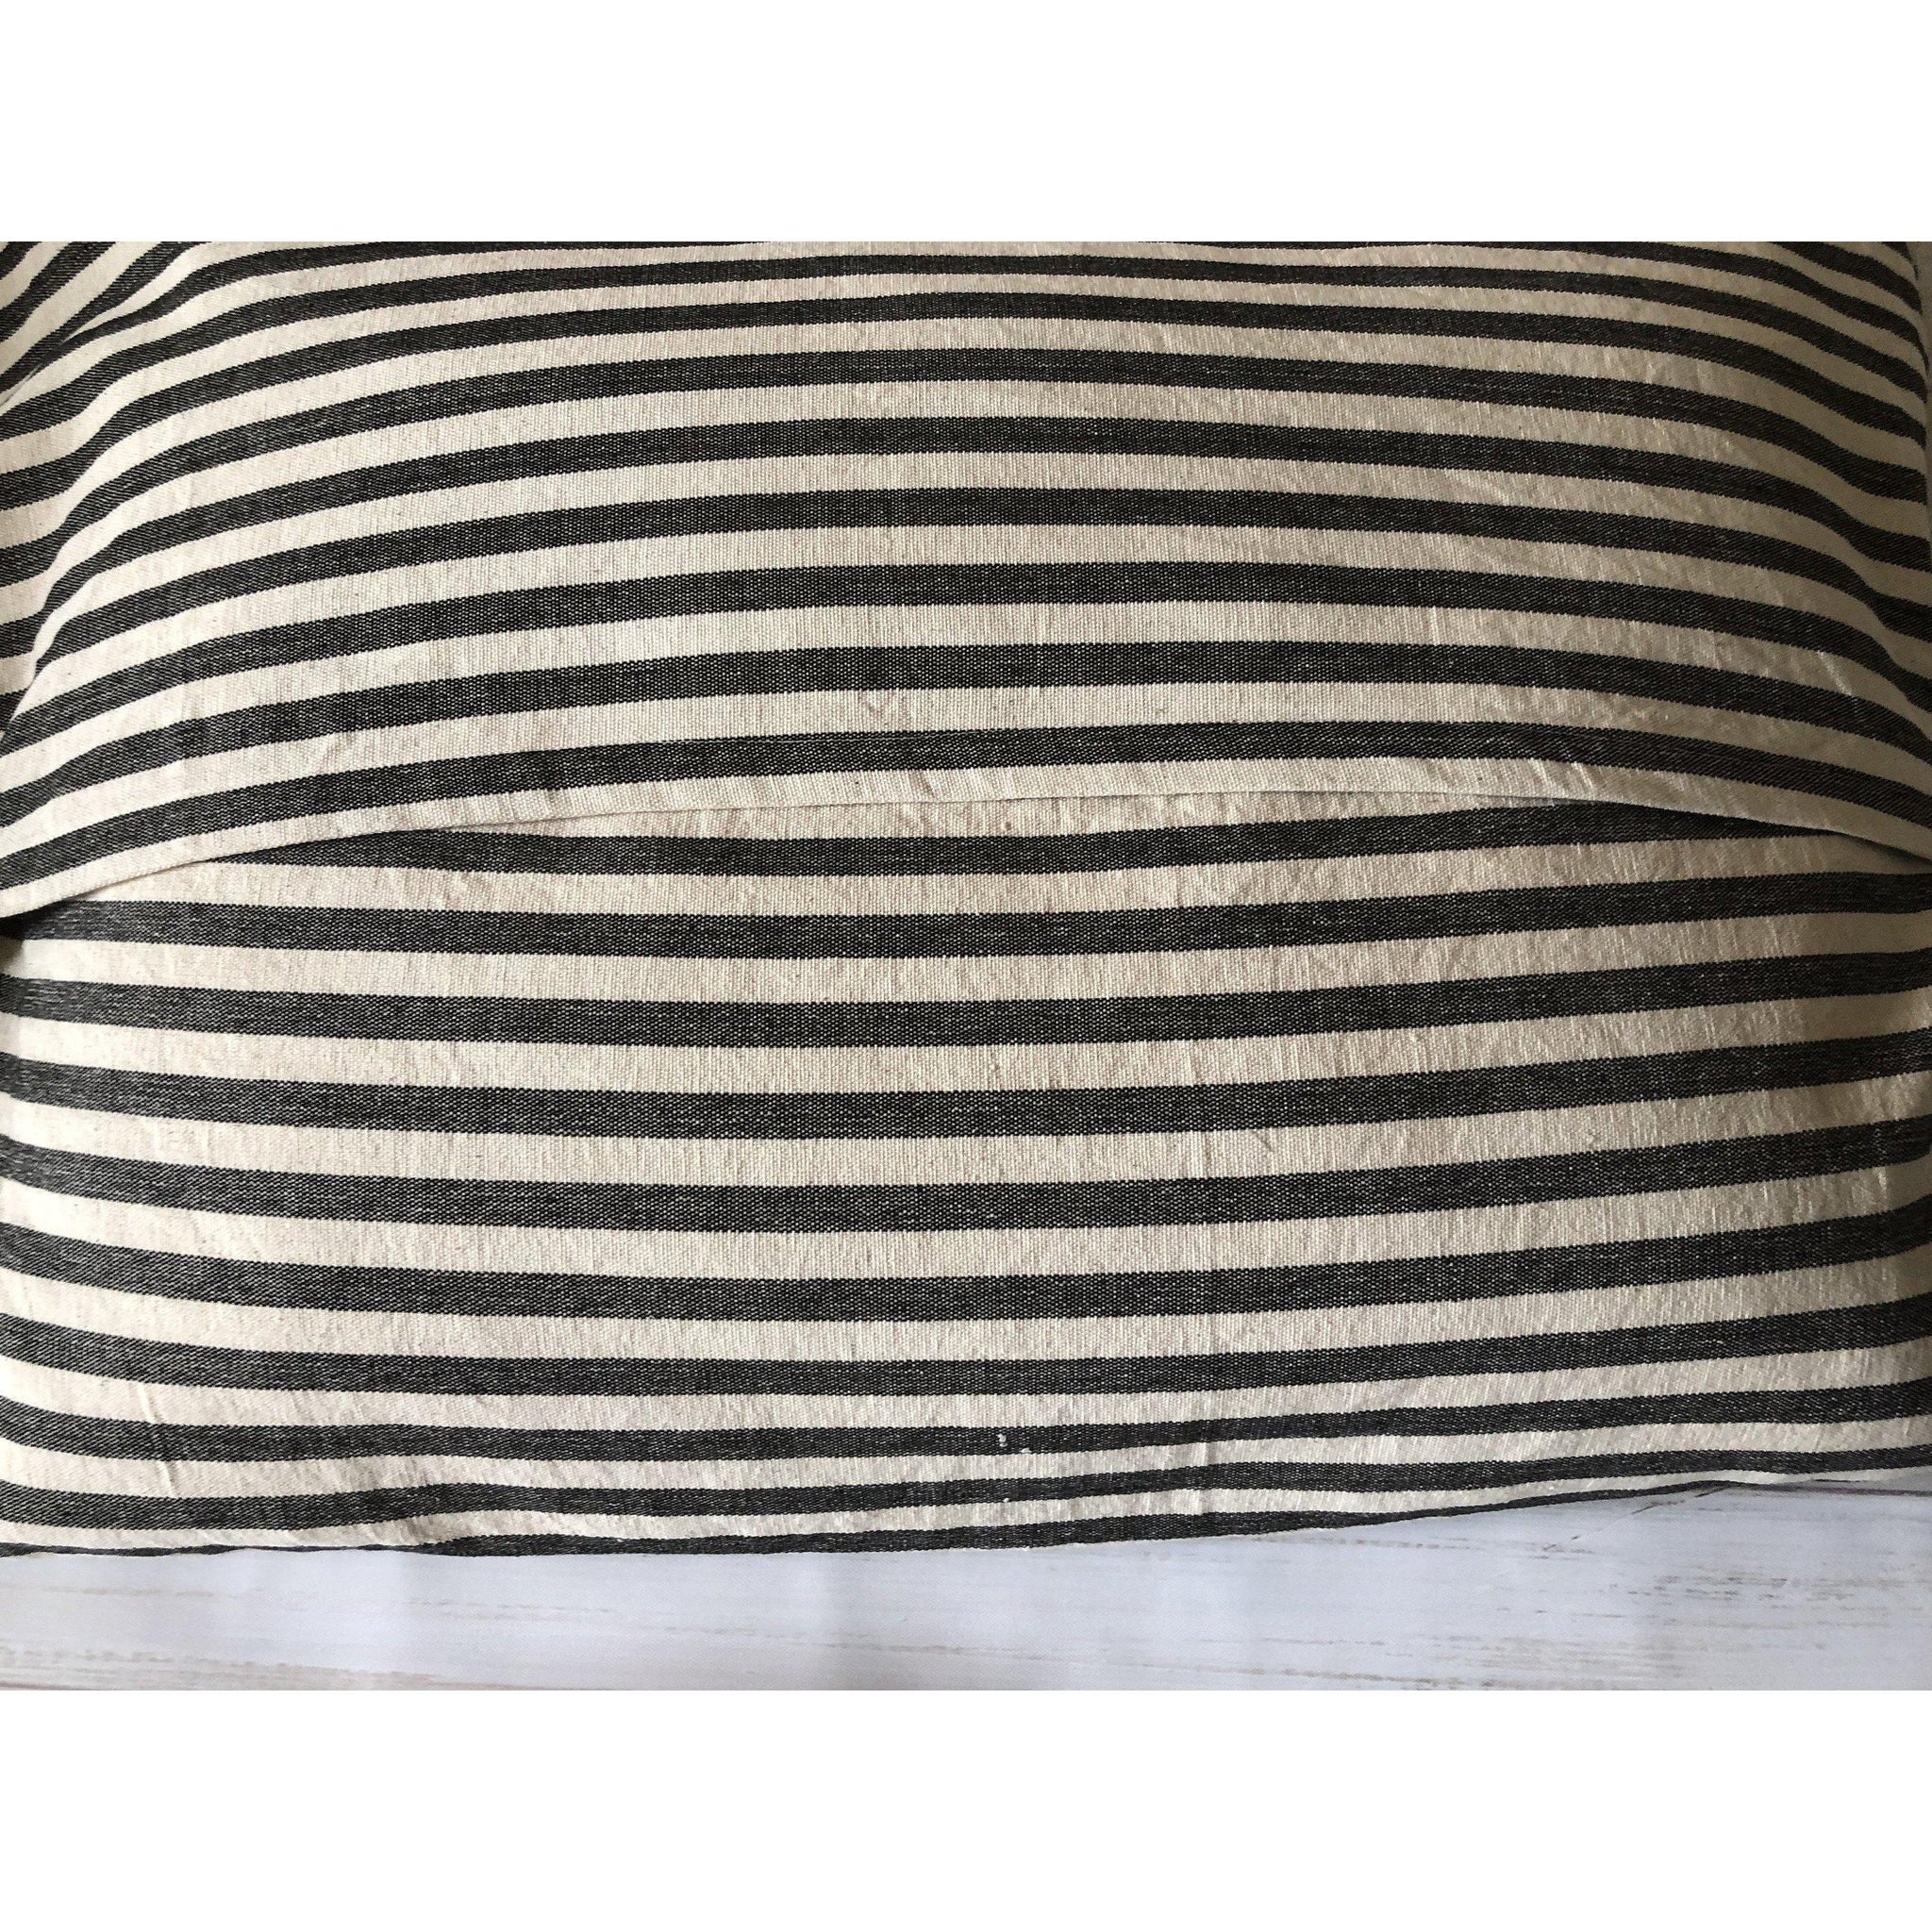 Ticking Stripe dog bed cover , Farmhouse Pet Pillow